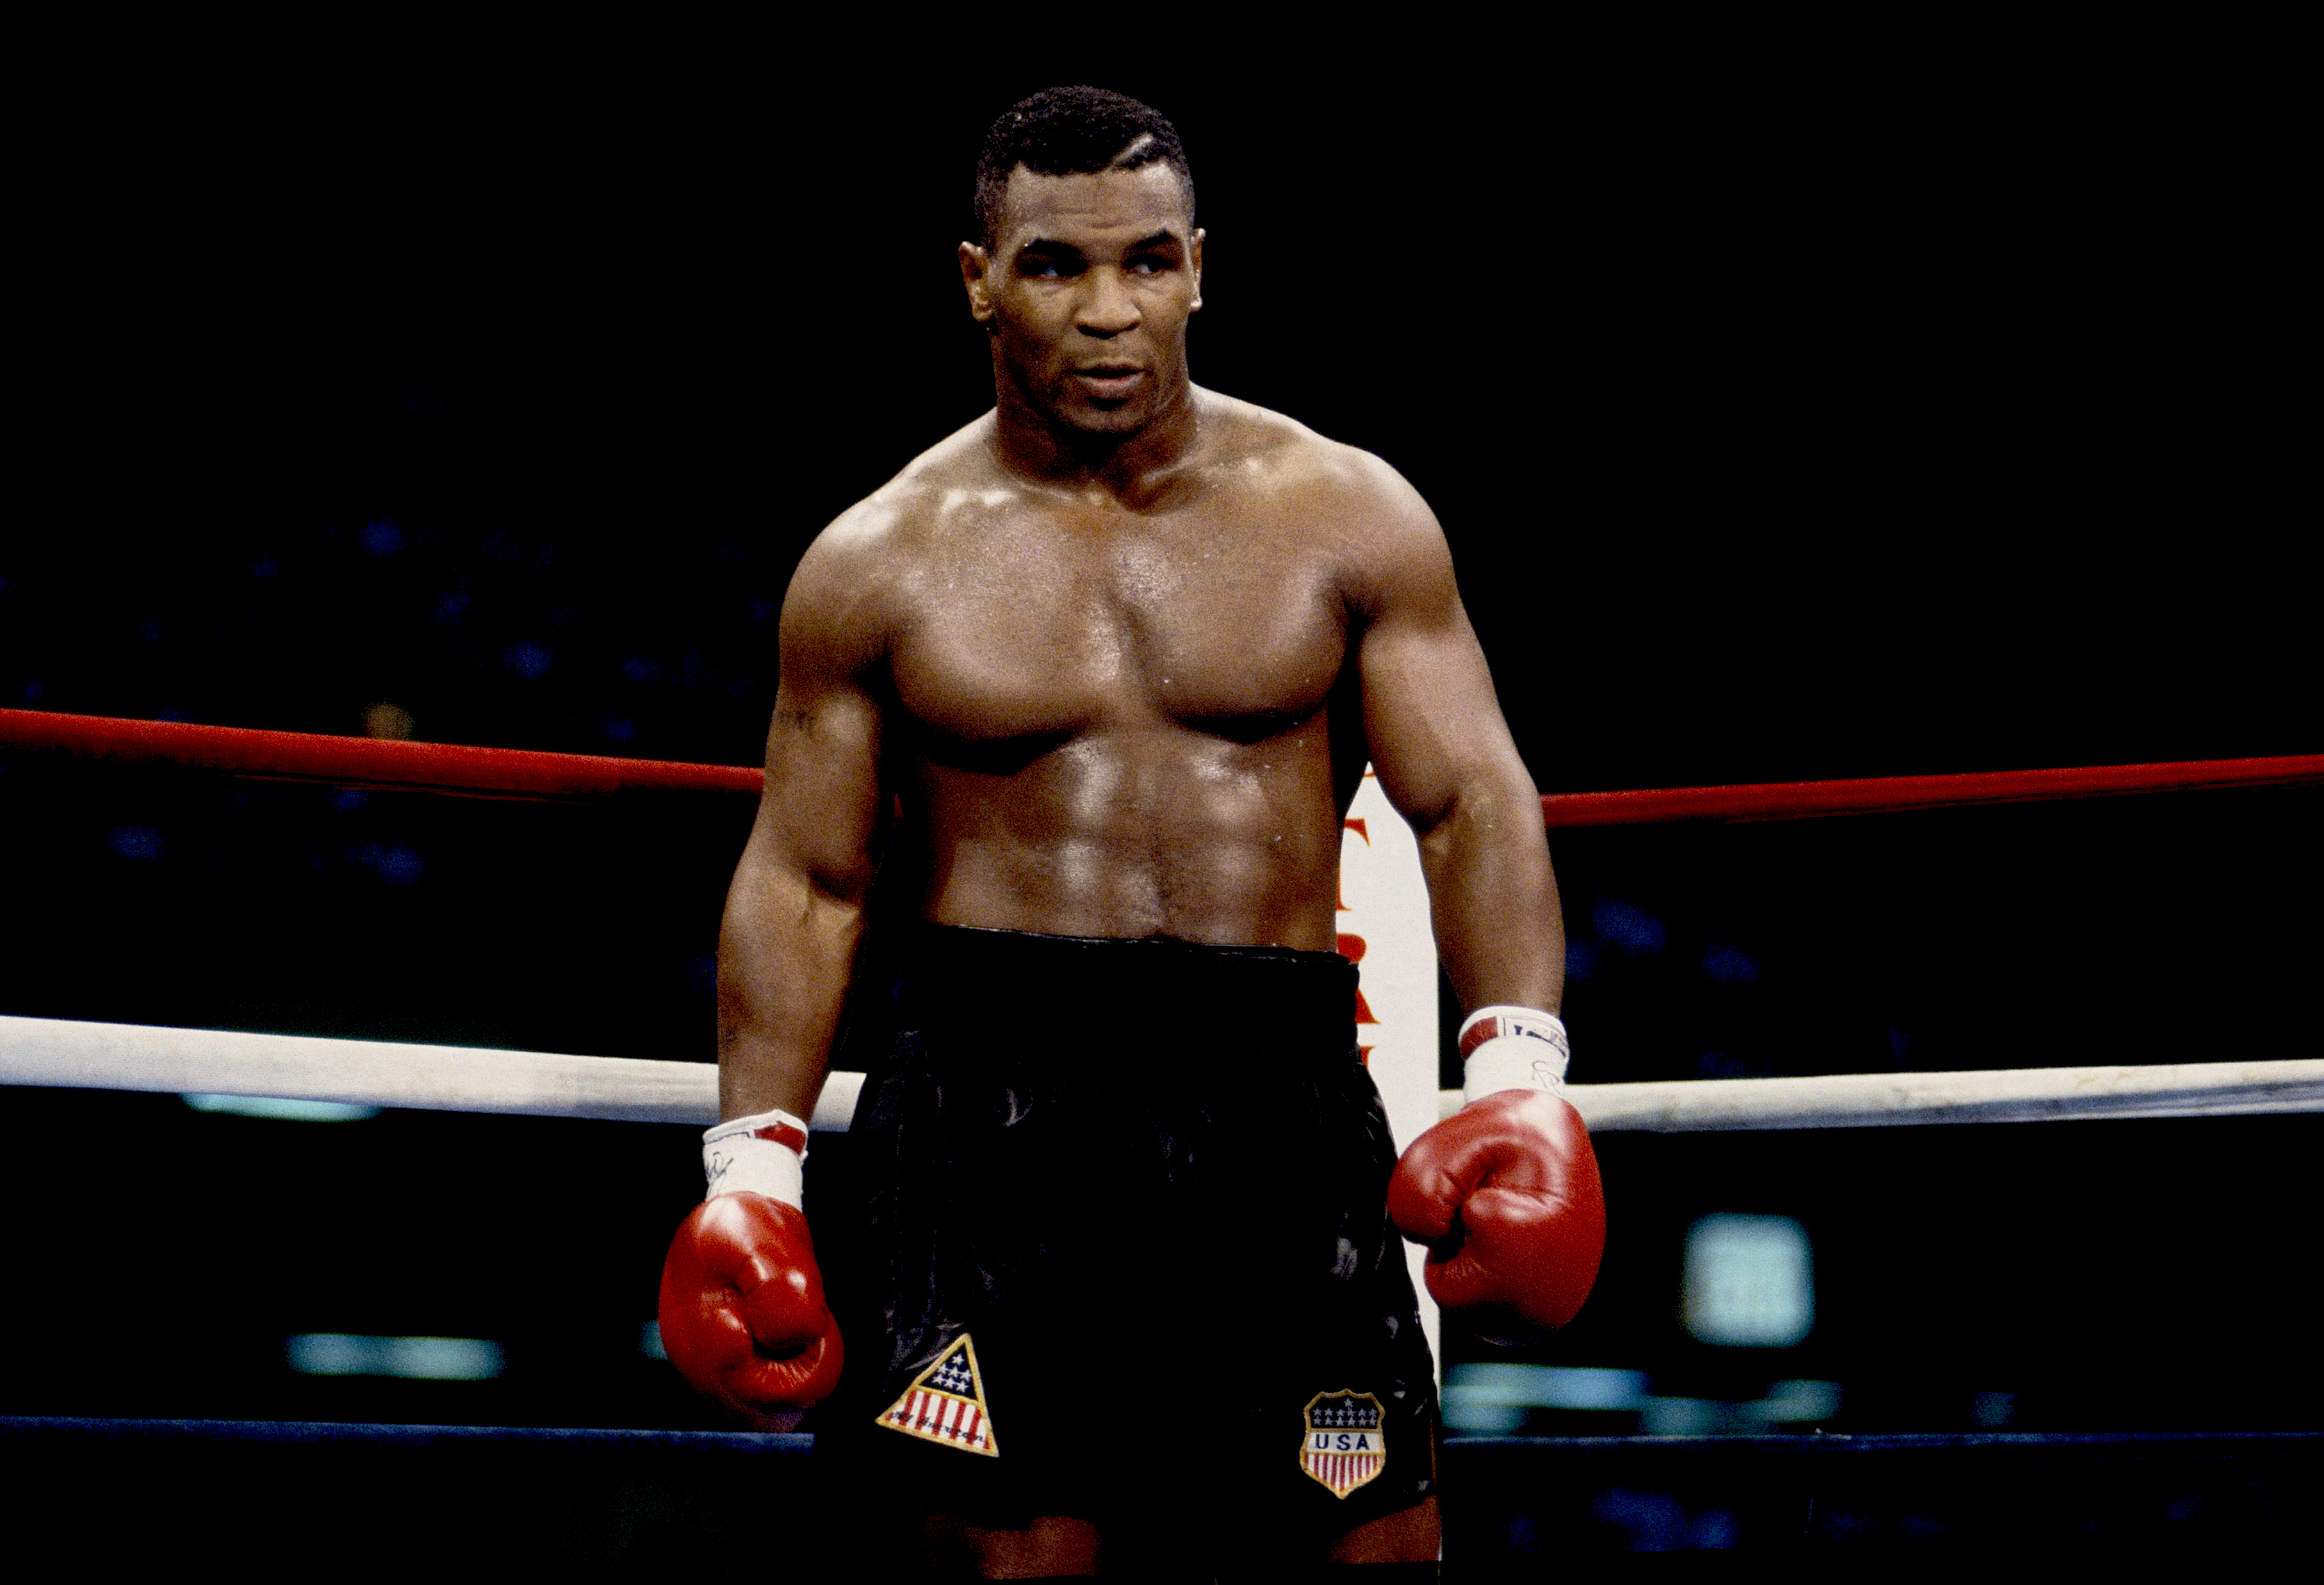 1920x1200 / 1920x1200 mike tyson wallpaper free hd widescreen -  Coolwallpapers.me!